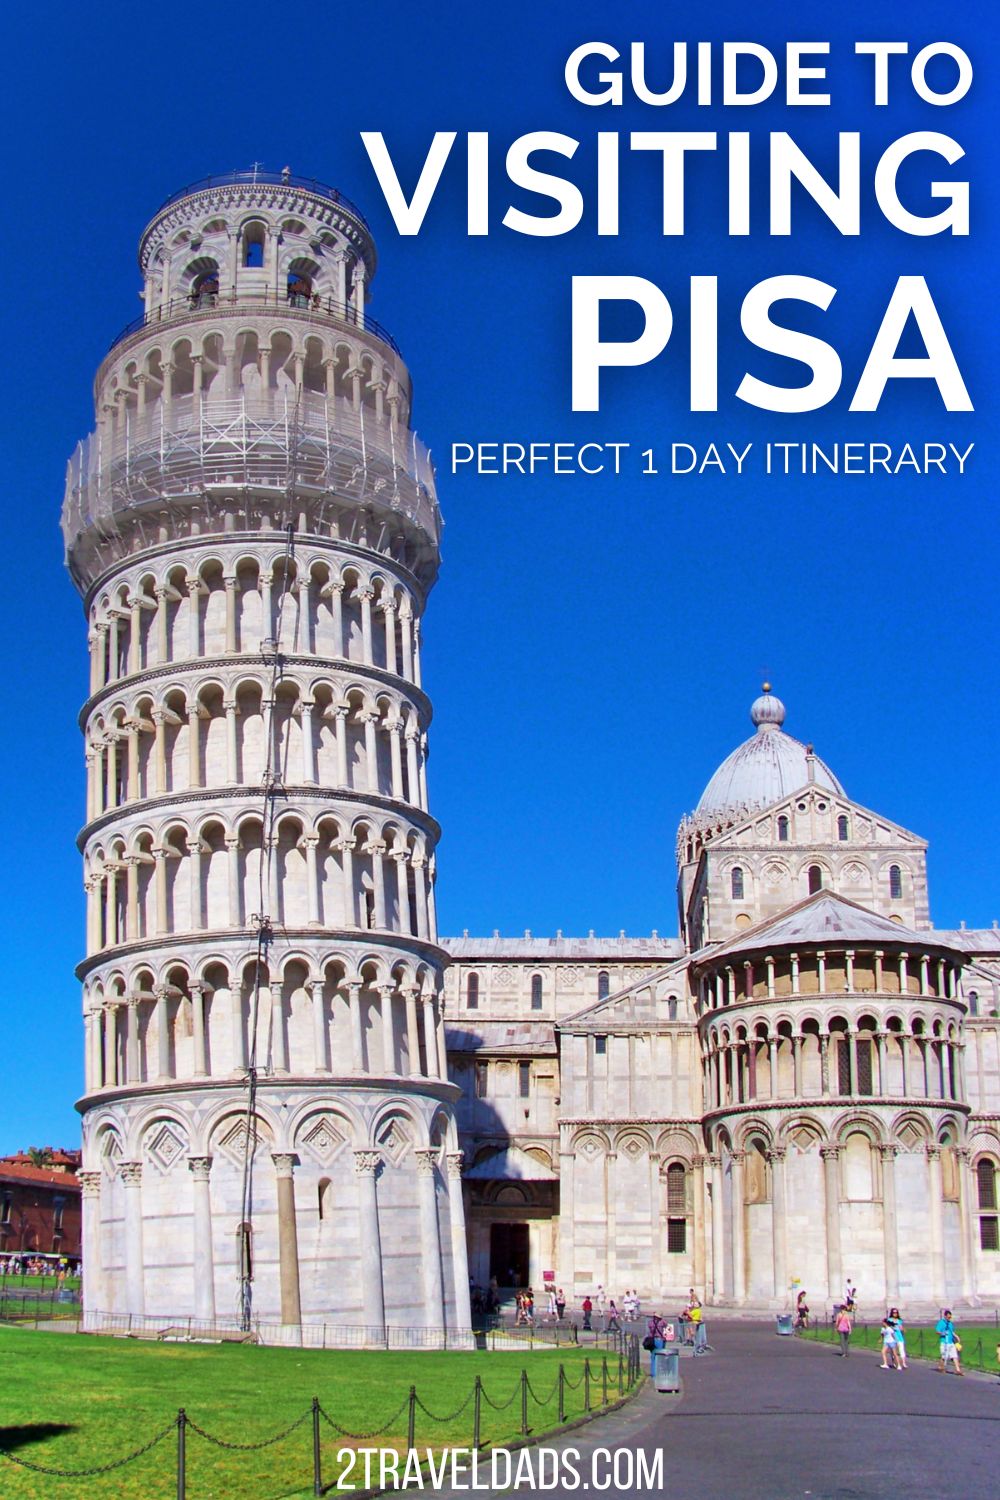 Pisa, Italy is a beautiful city and is so easy to visit in one day. While two or three days is ideal, this 1 day itinerary for seeing the best of Pisa is perfect for a day visit or stop between destinations on your Italy trip.